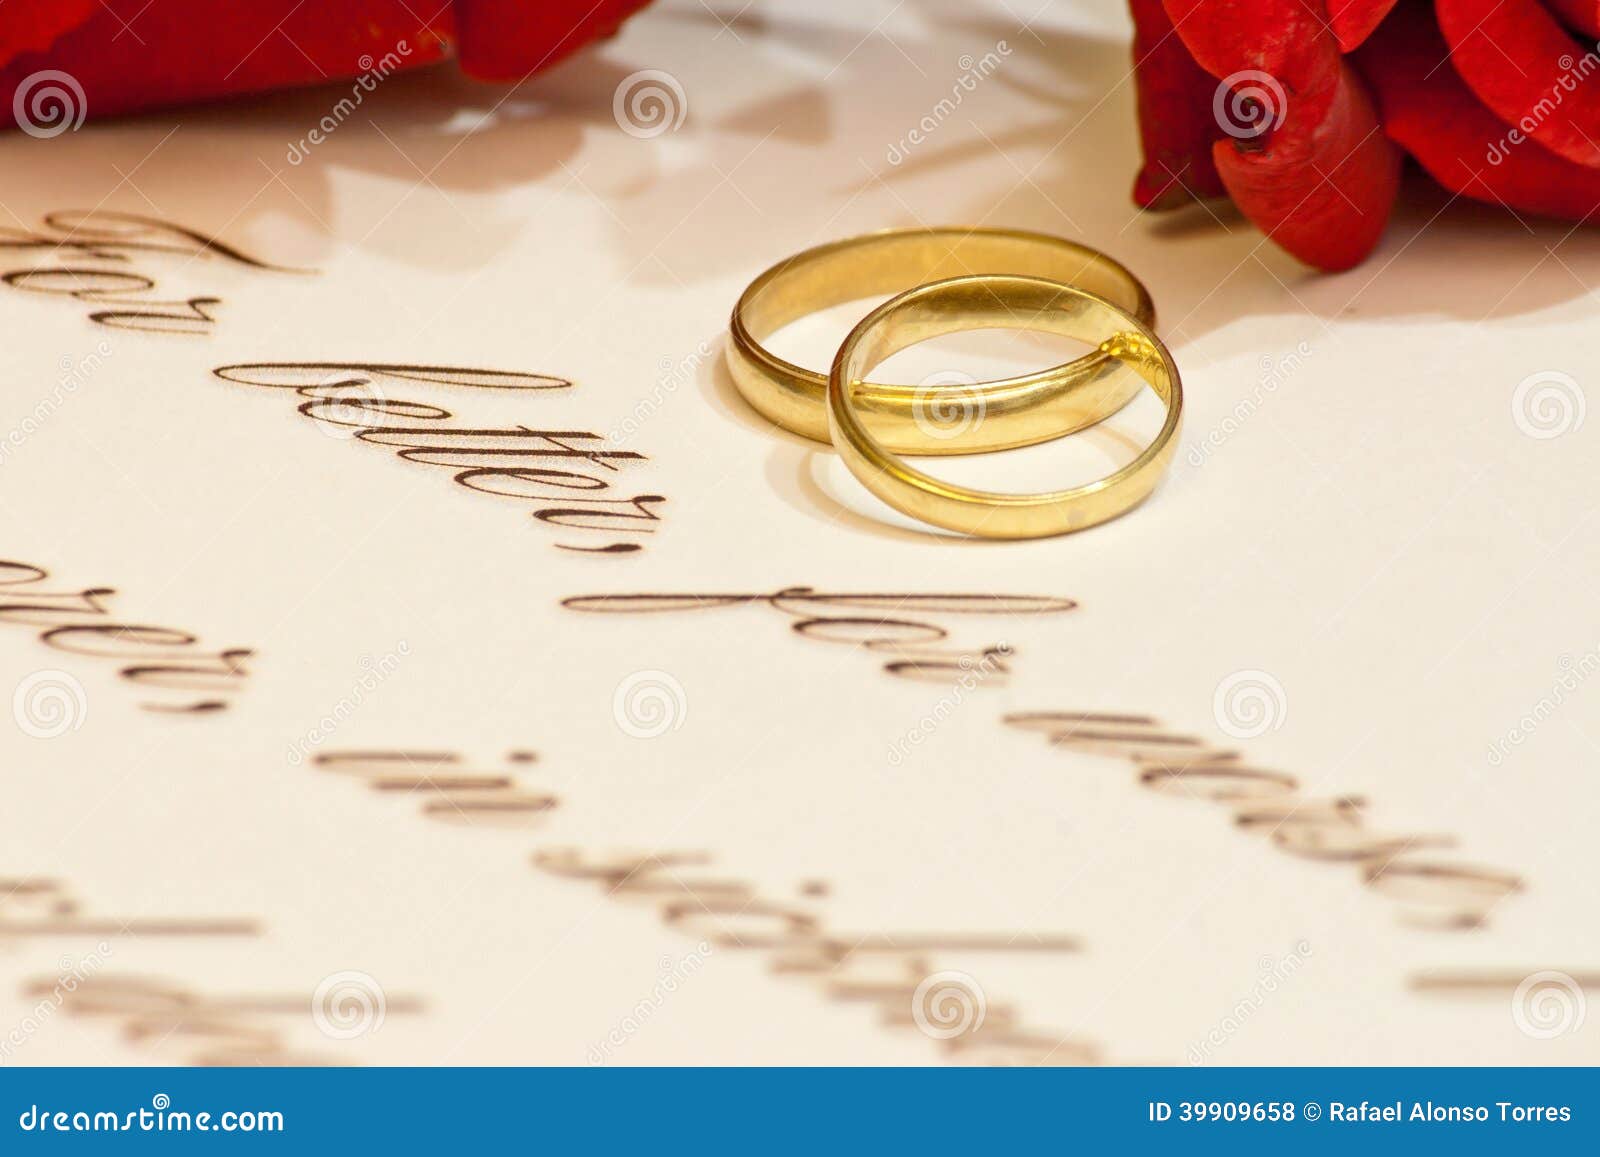 Picture of wedding rings with vows and roses.